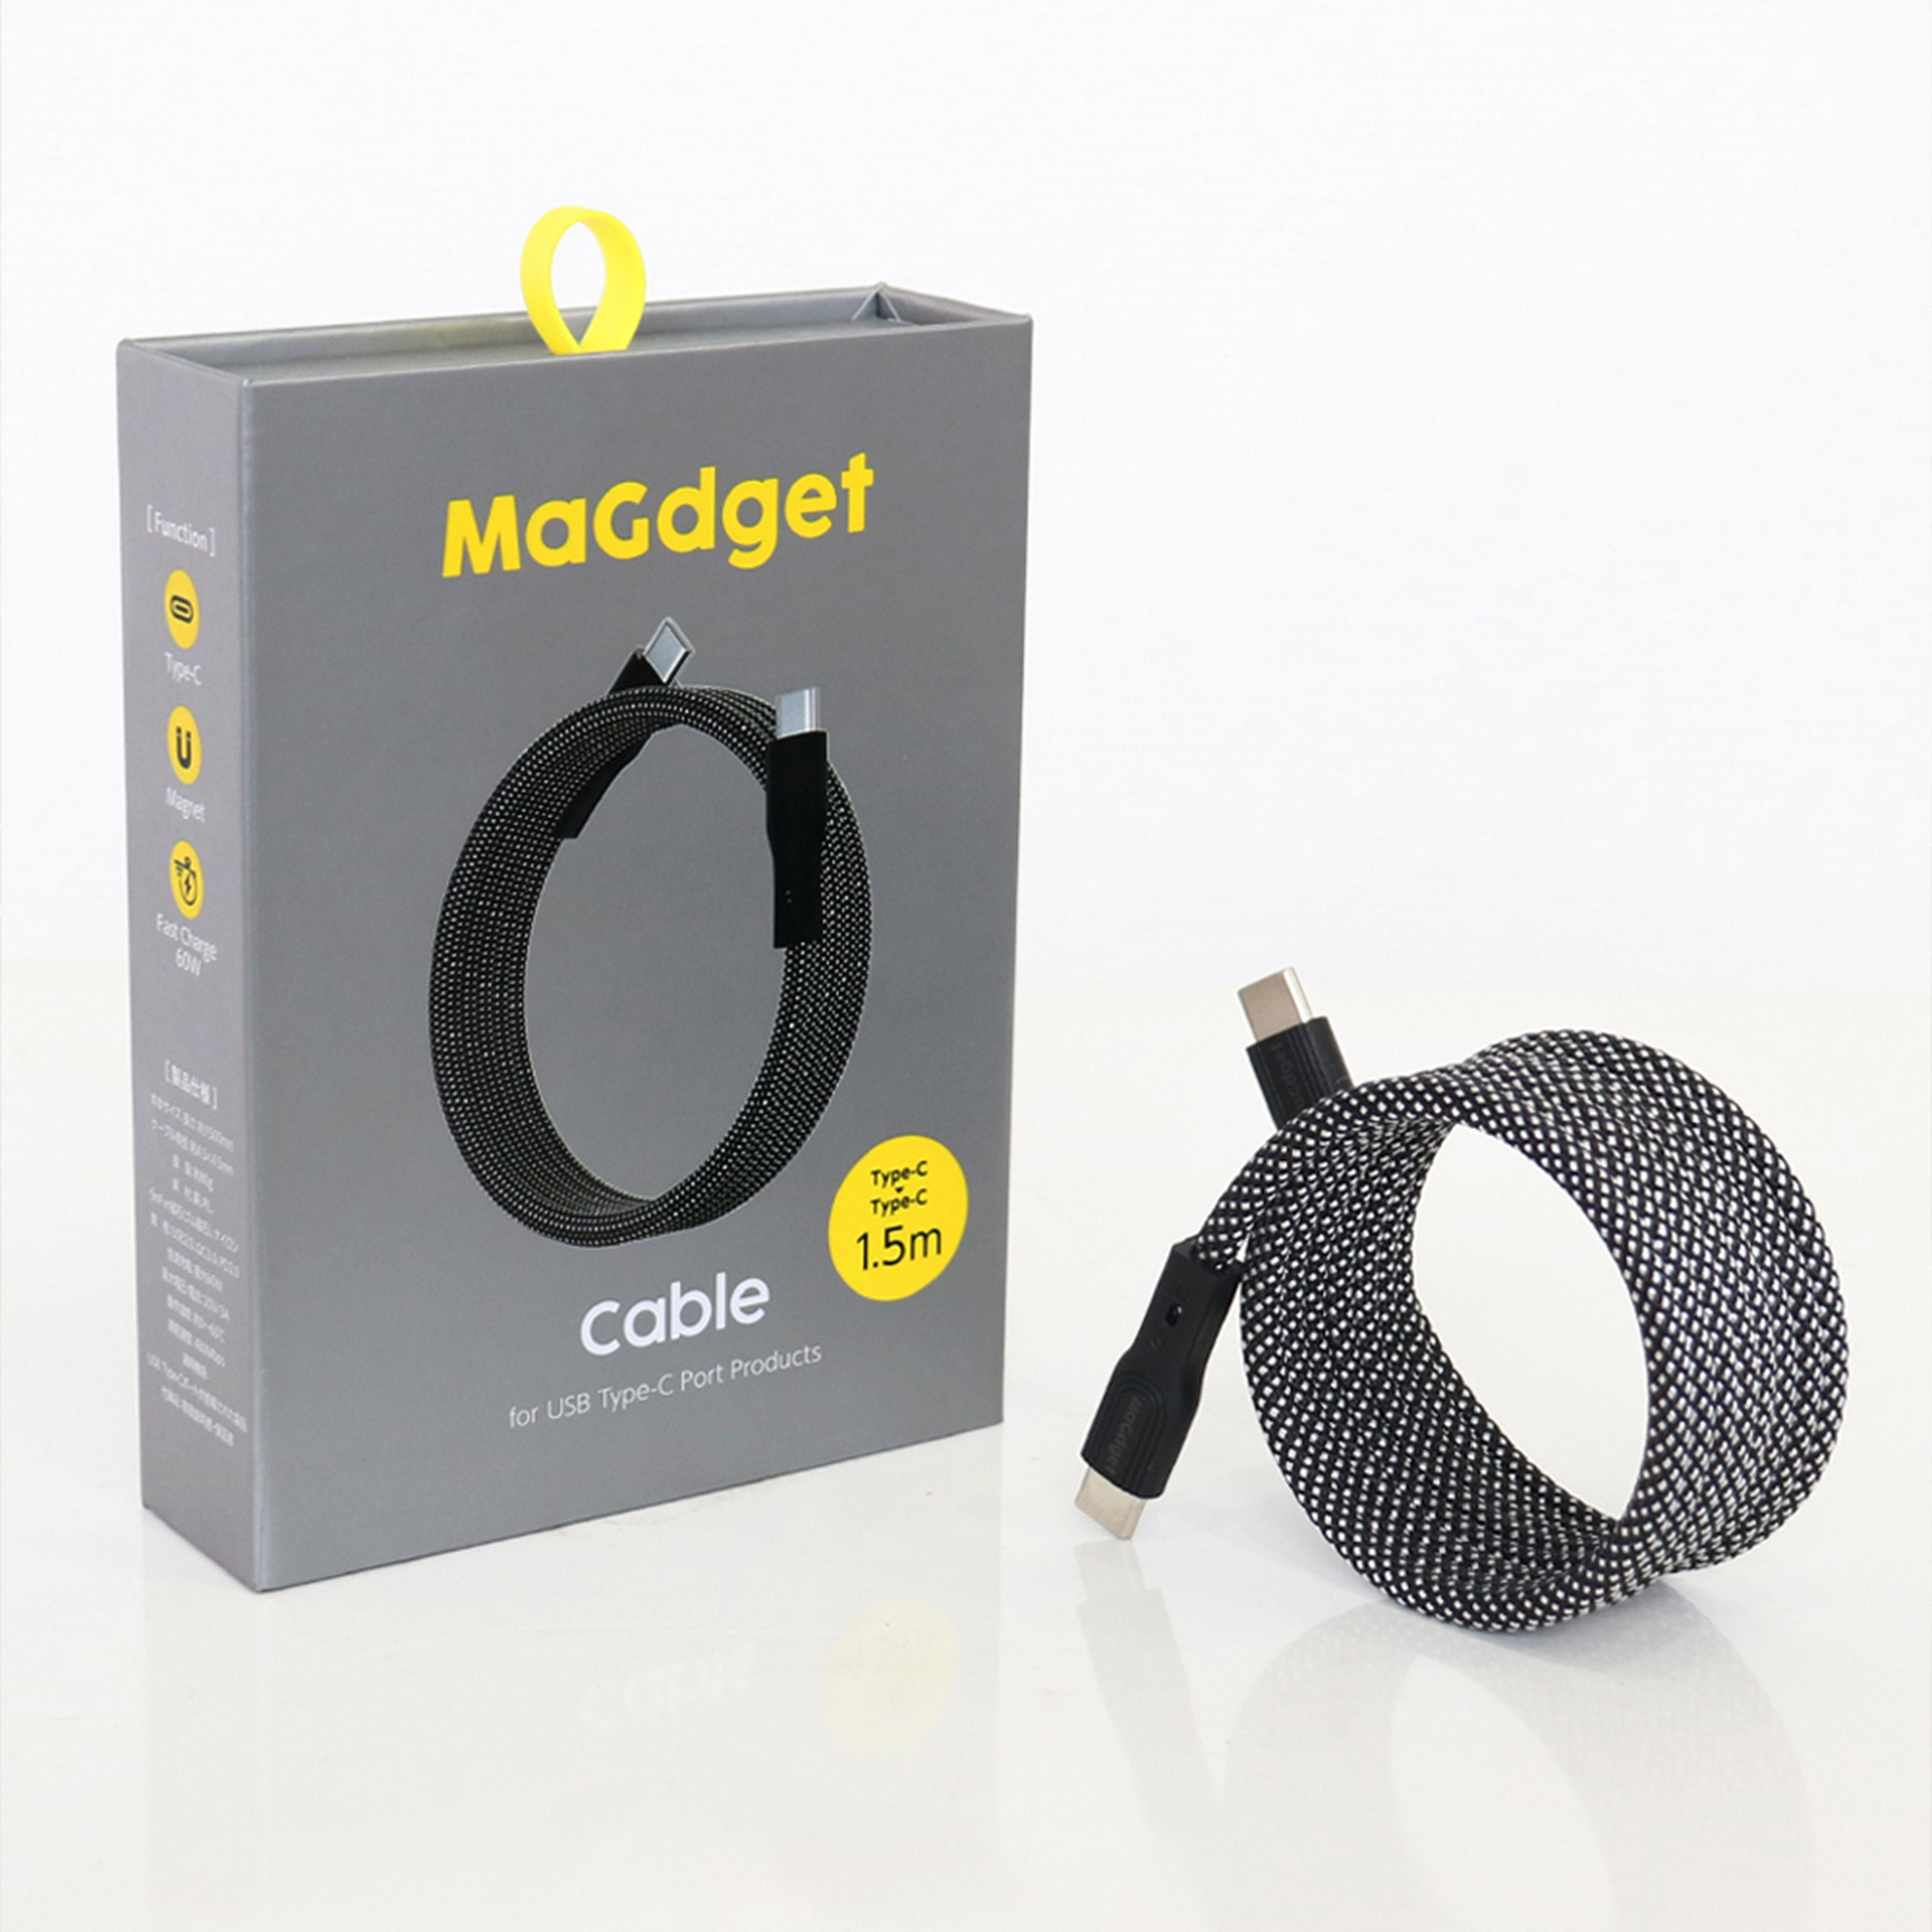 MaGdget Cable